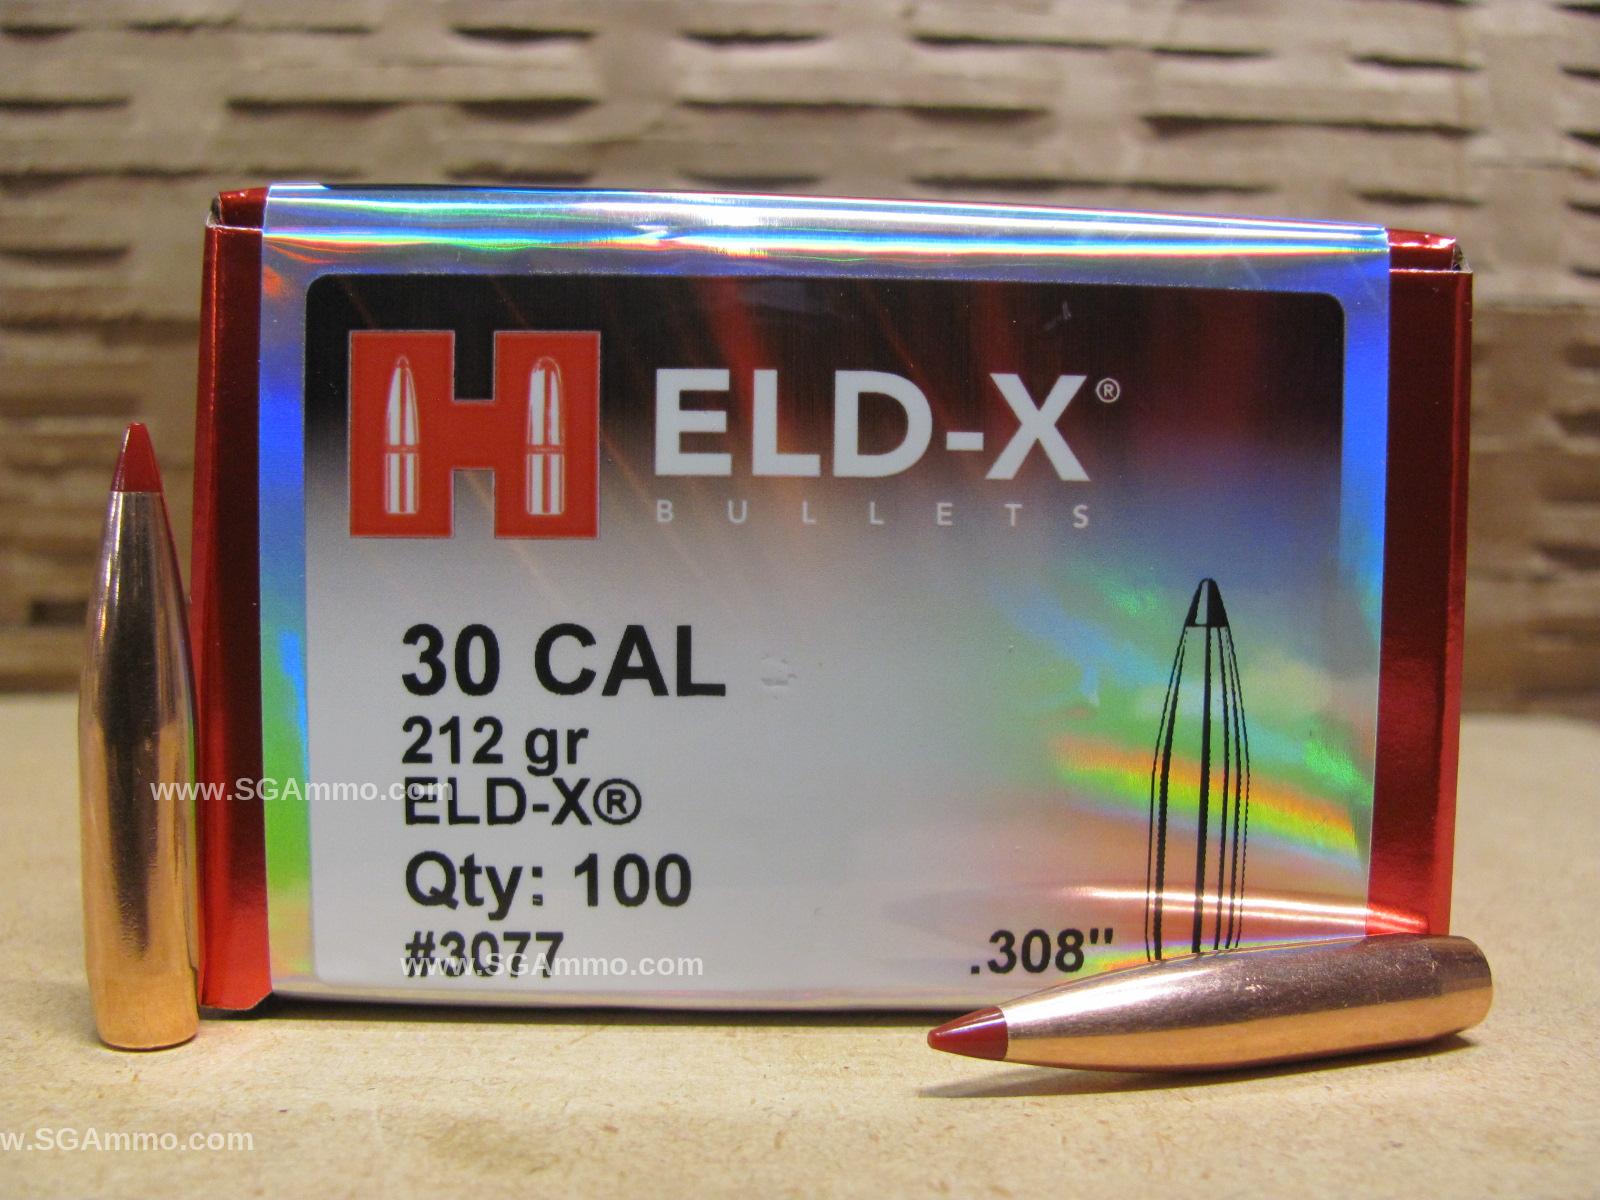 100 Count Box - 30 Cal 212 Grain ELD-X Projectile For Handloading .308